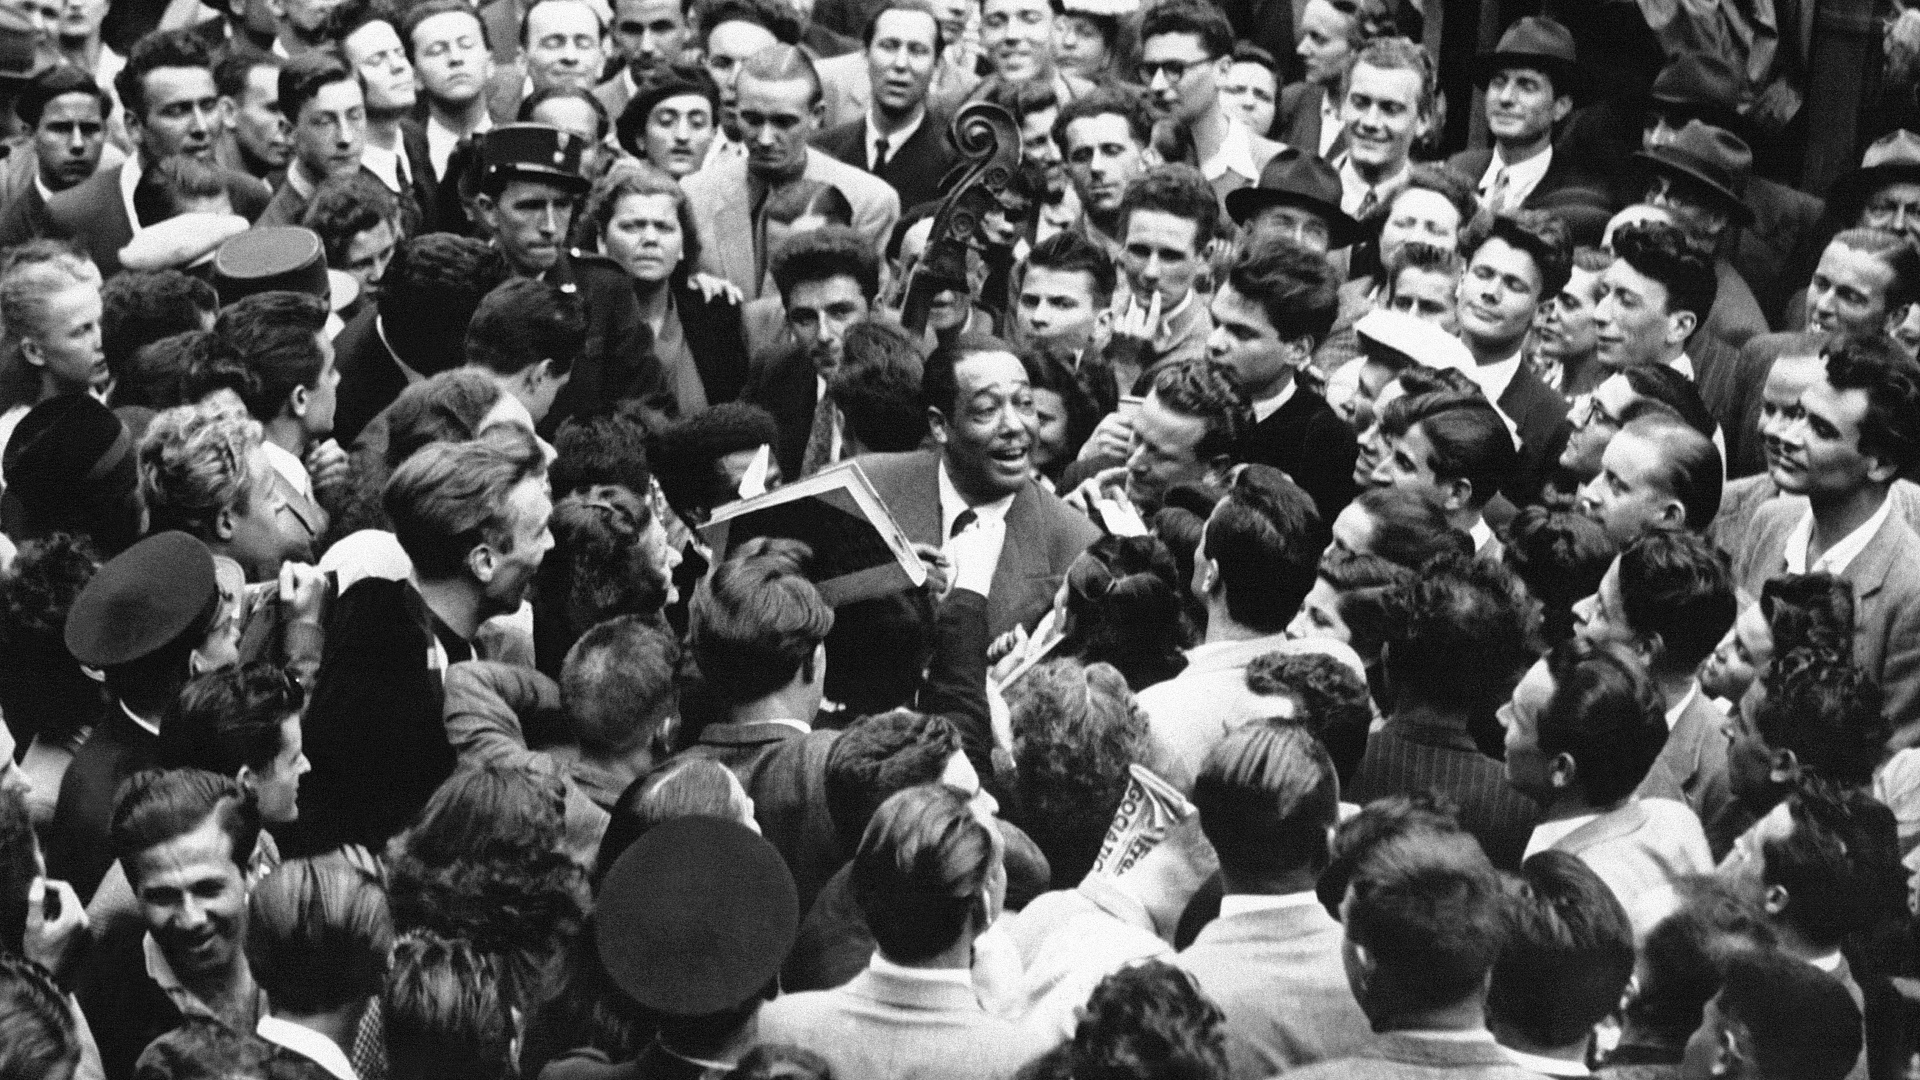 A large crowd welcomes the composer, arranger and pianist Duke Ellington on his arrival at Gare du Nord in Paris, 1948. Photo: Keystone-France/Gamma-Rapho/Getty